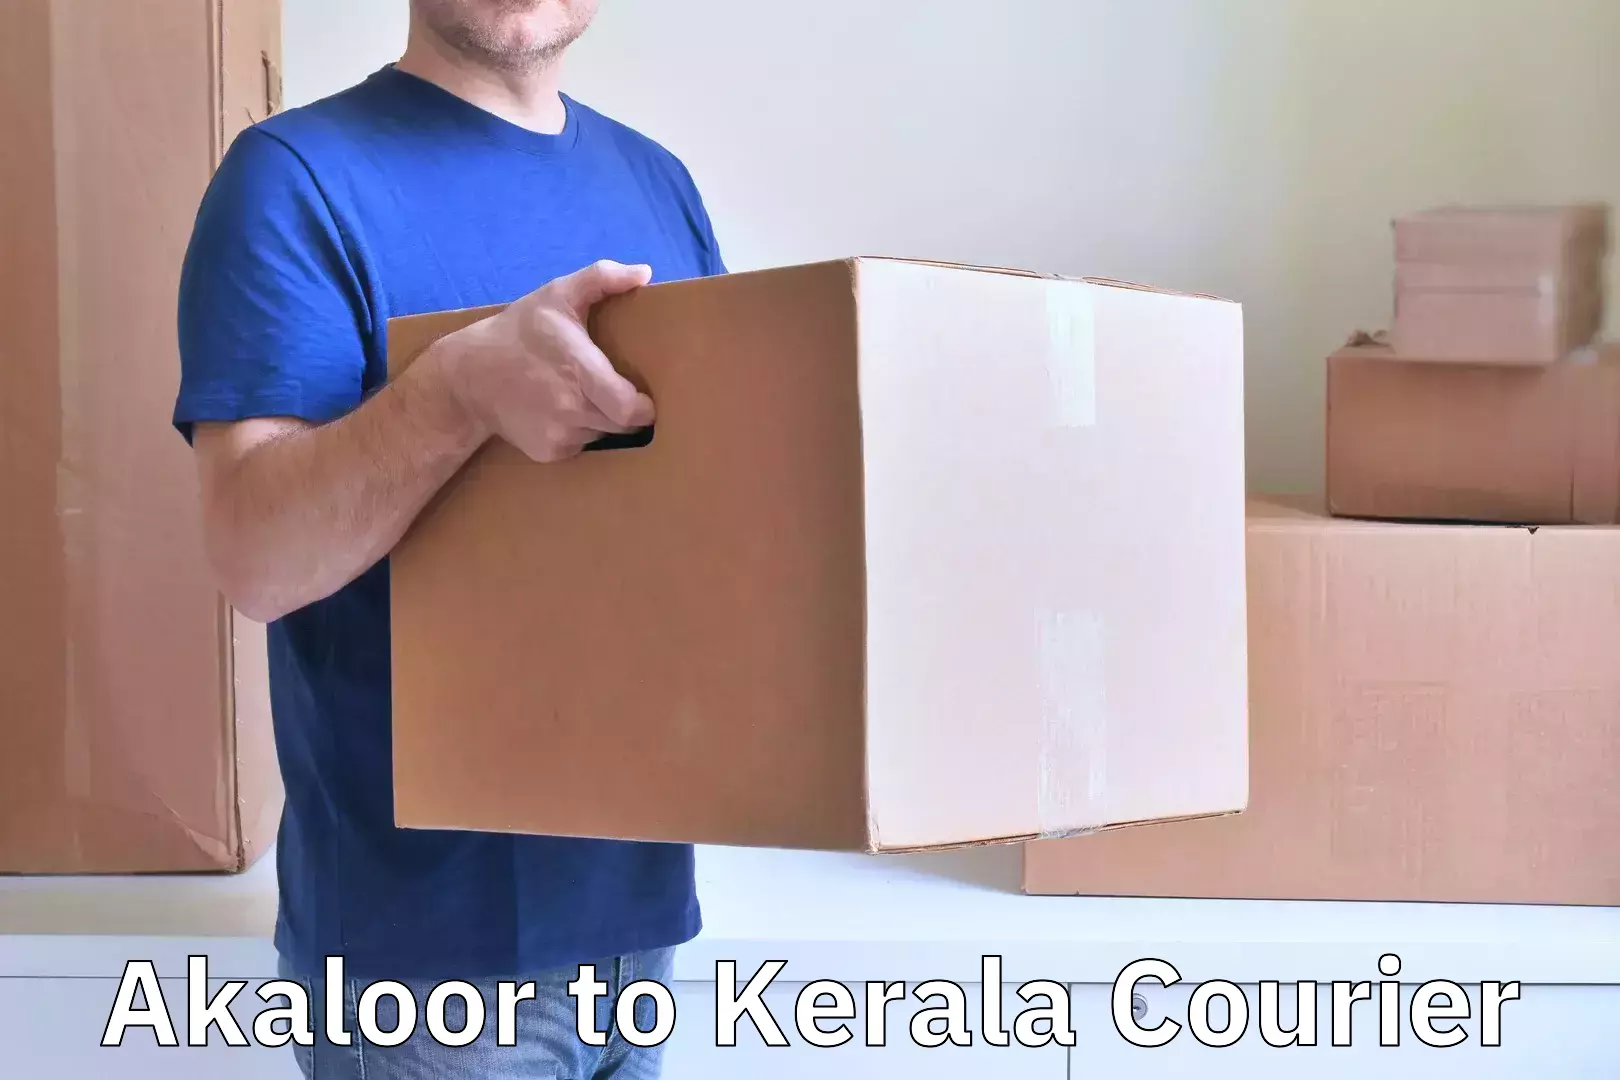 Luggage delivery system Akaloor to Kerala